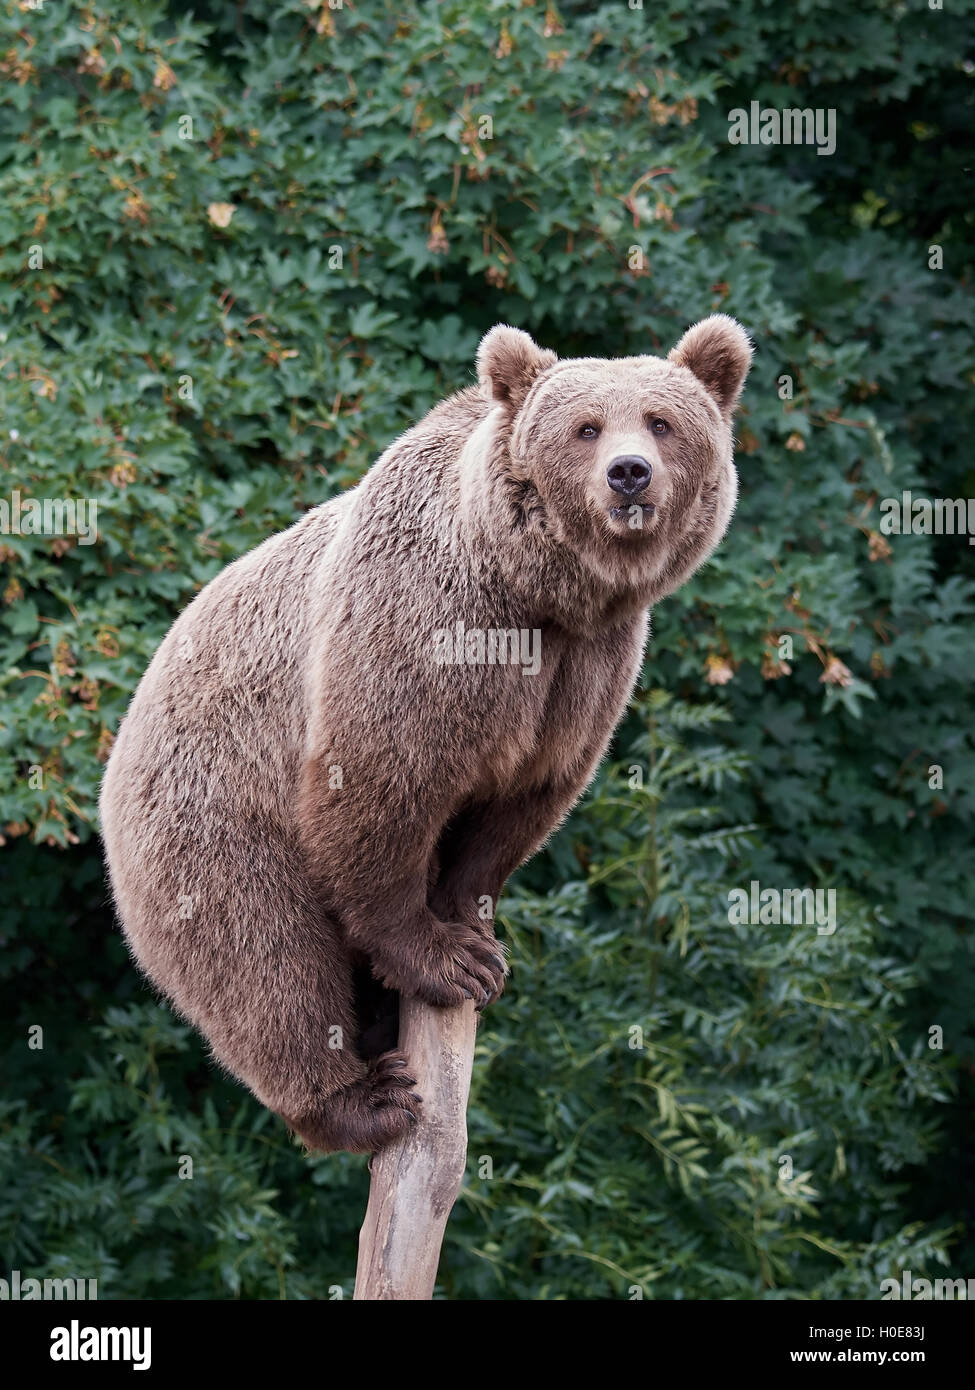 Brown bear sitting on a tree trunk with vegetation in the background Stock Photo